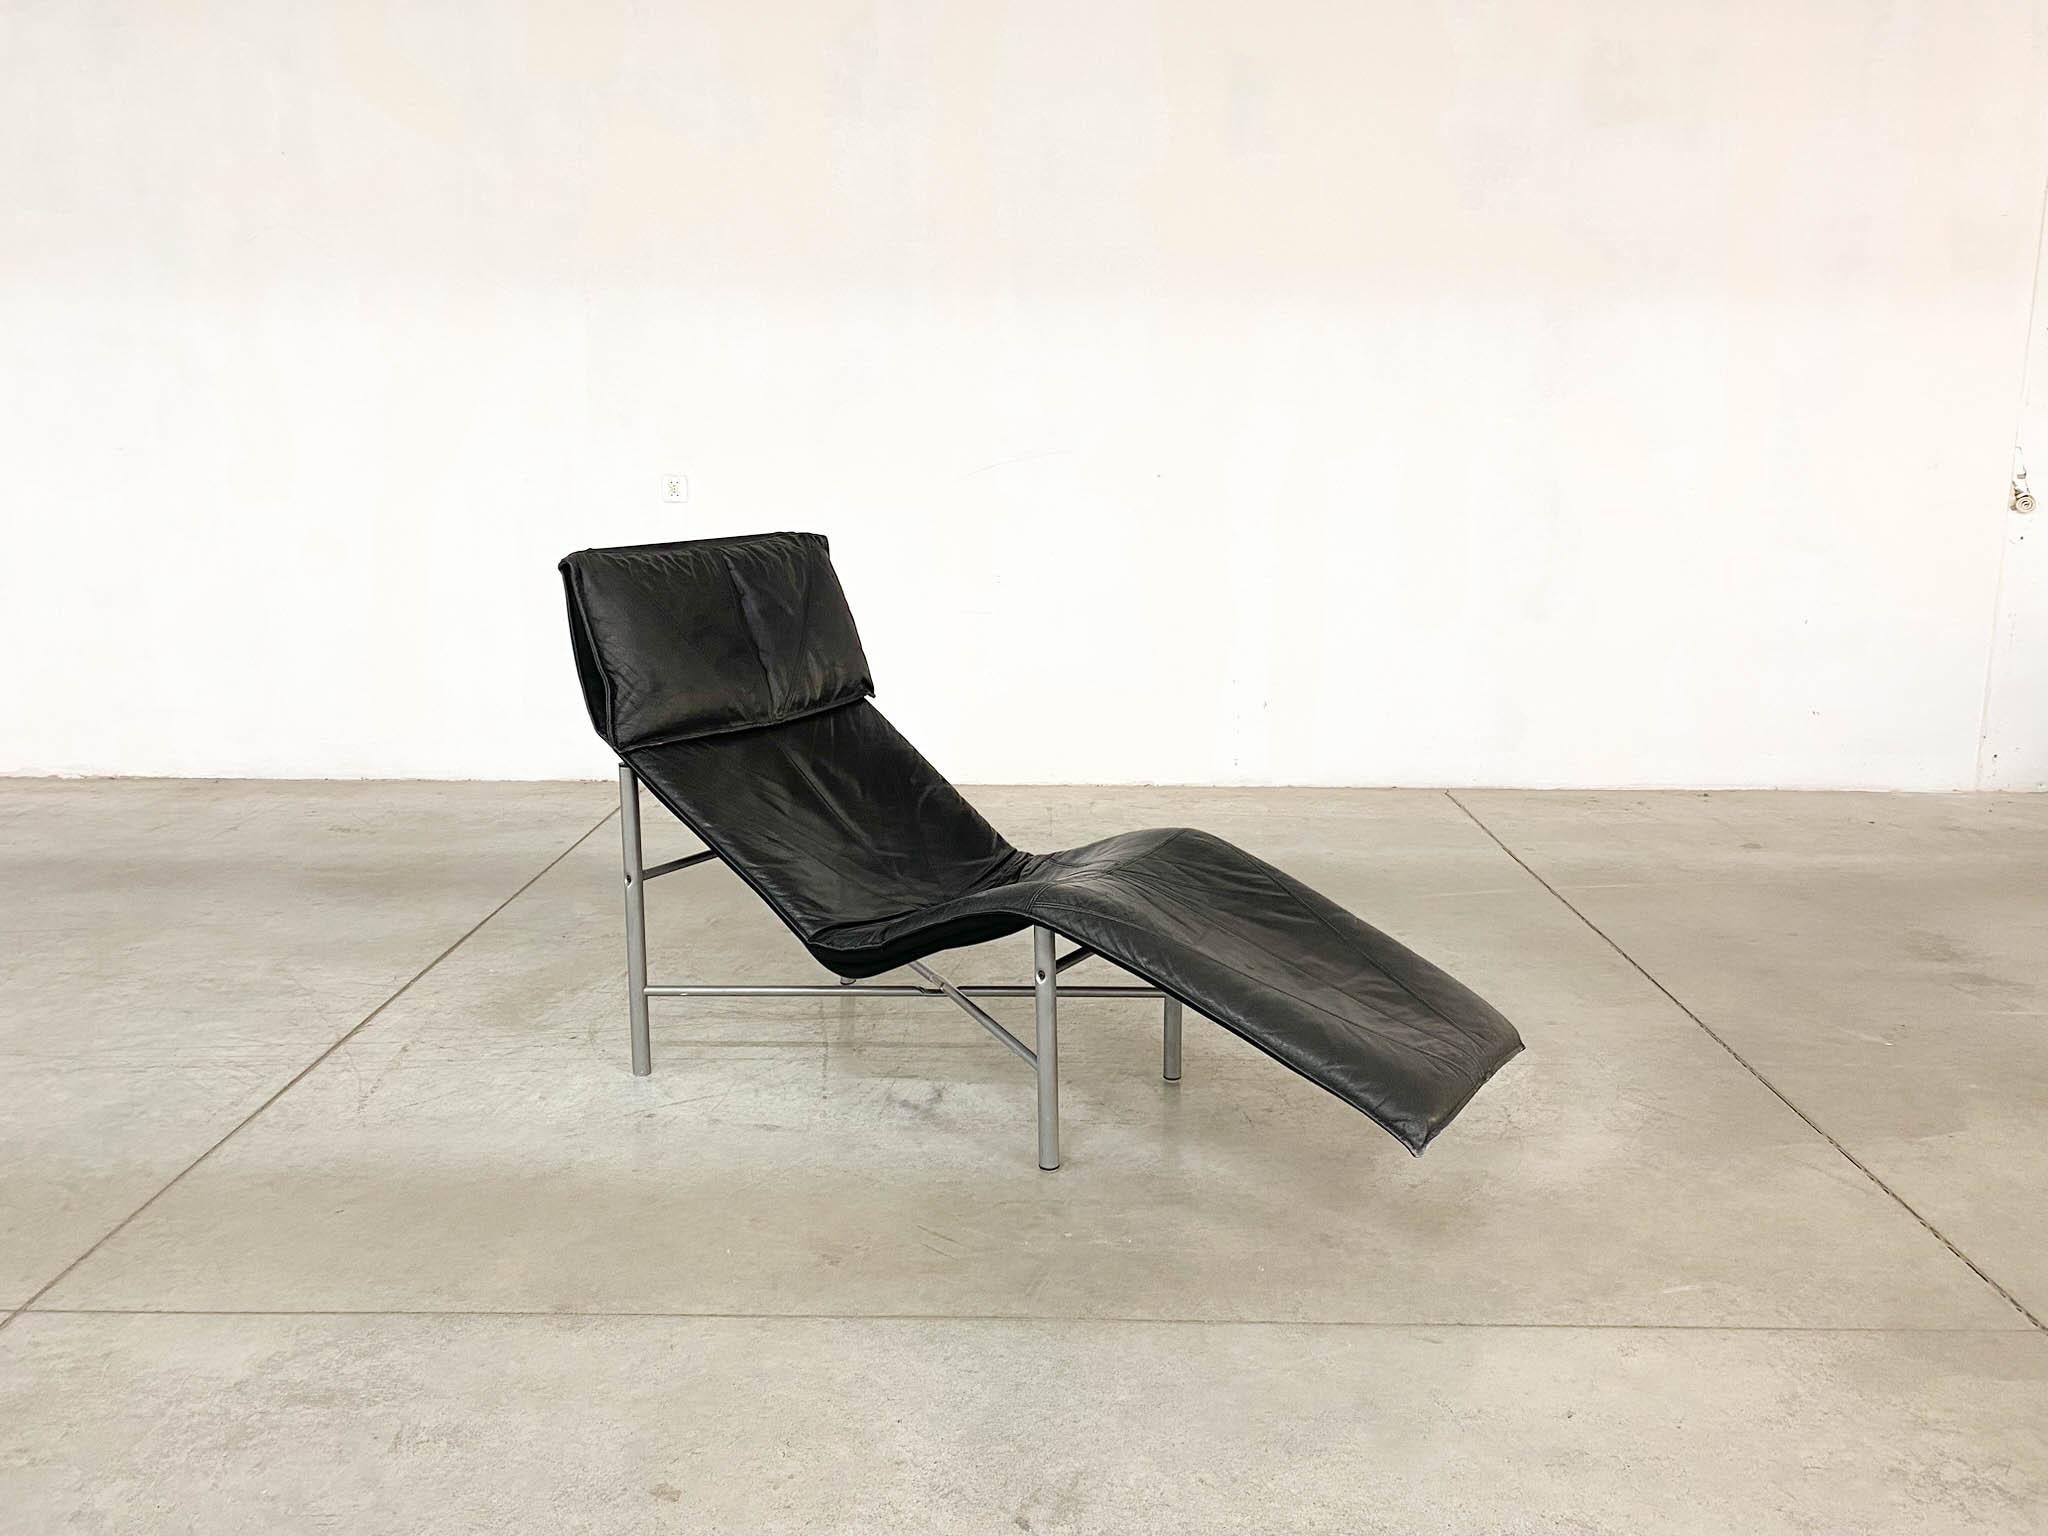 The Skye Lounge Chair, a creation of Tord Bjorklund for Ikea, epitomizes vintage Scandinavian design from the 1970s. Crafted in Sweden, it boasts a harmonious blend of black leather and metal, exuding sophistication. Lightly used, with light